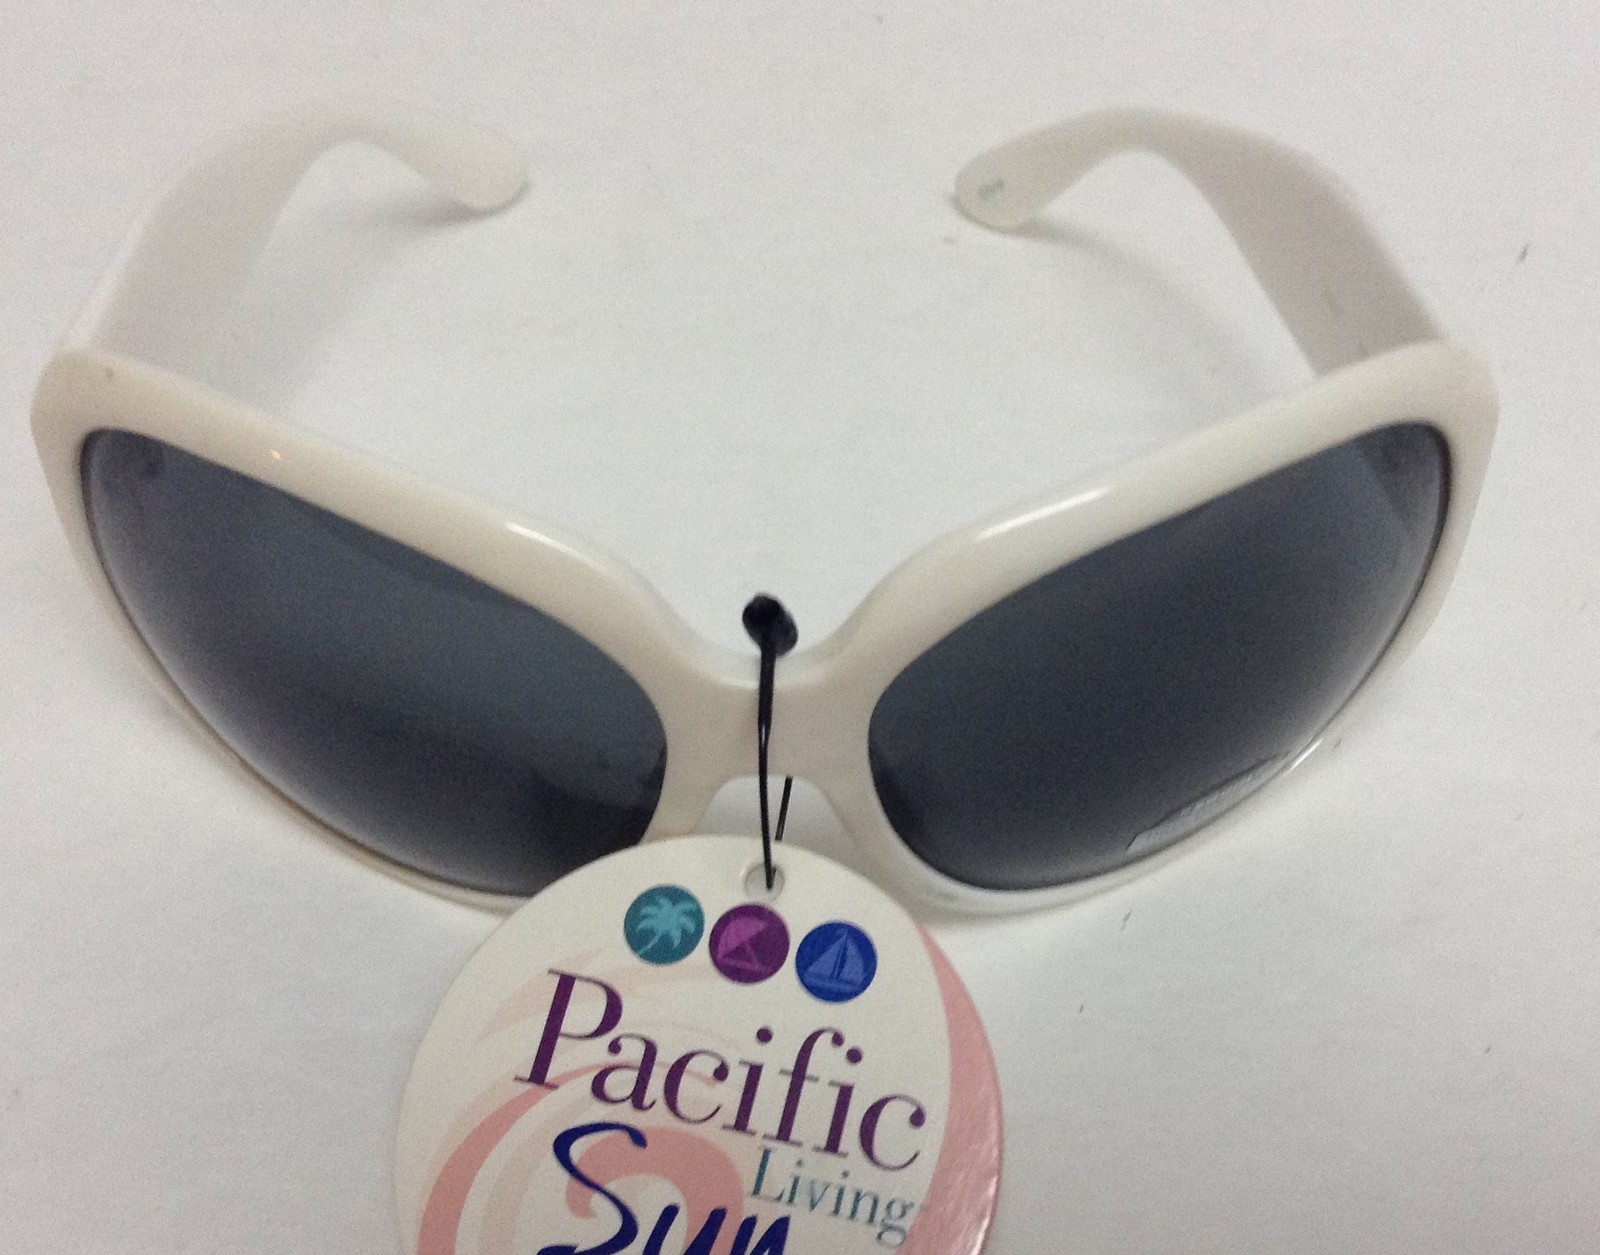 Primary image for Pacific Sun White Frame Sunglasses NWT 100% UV Protection